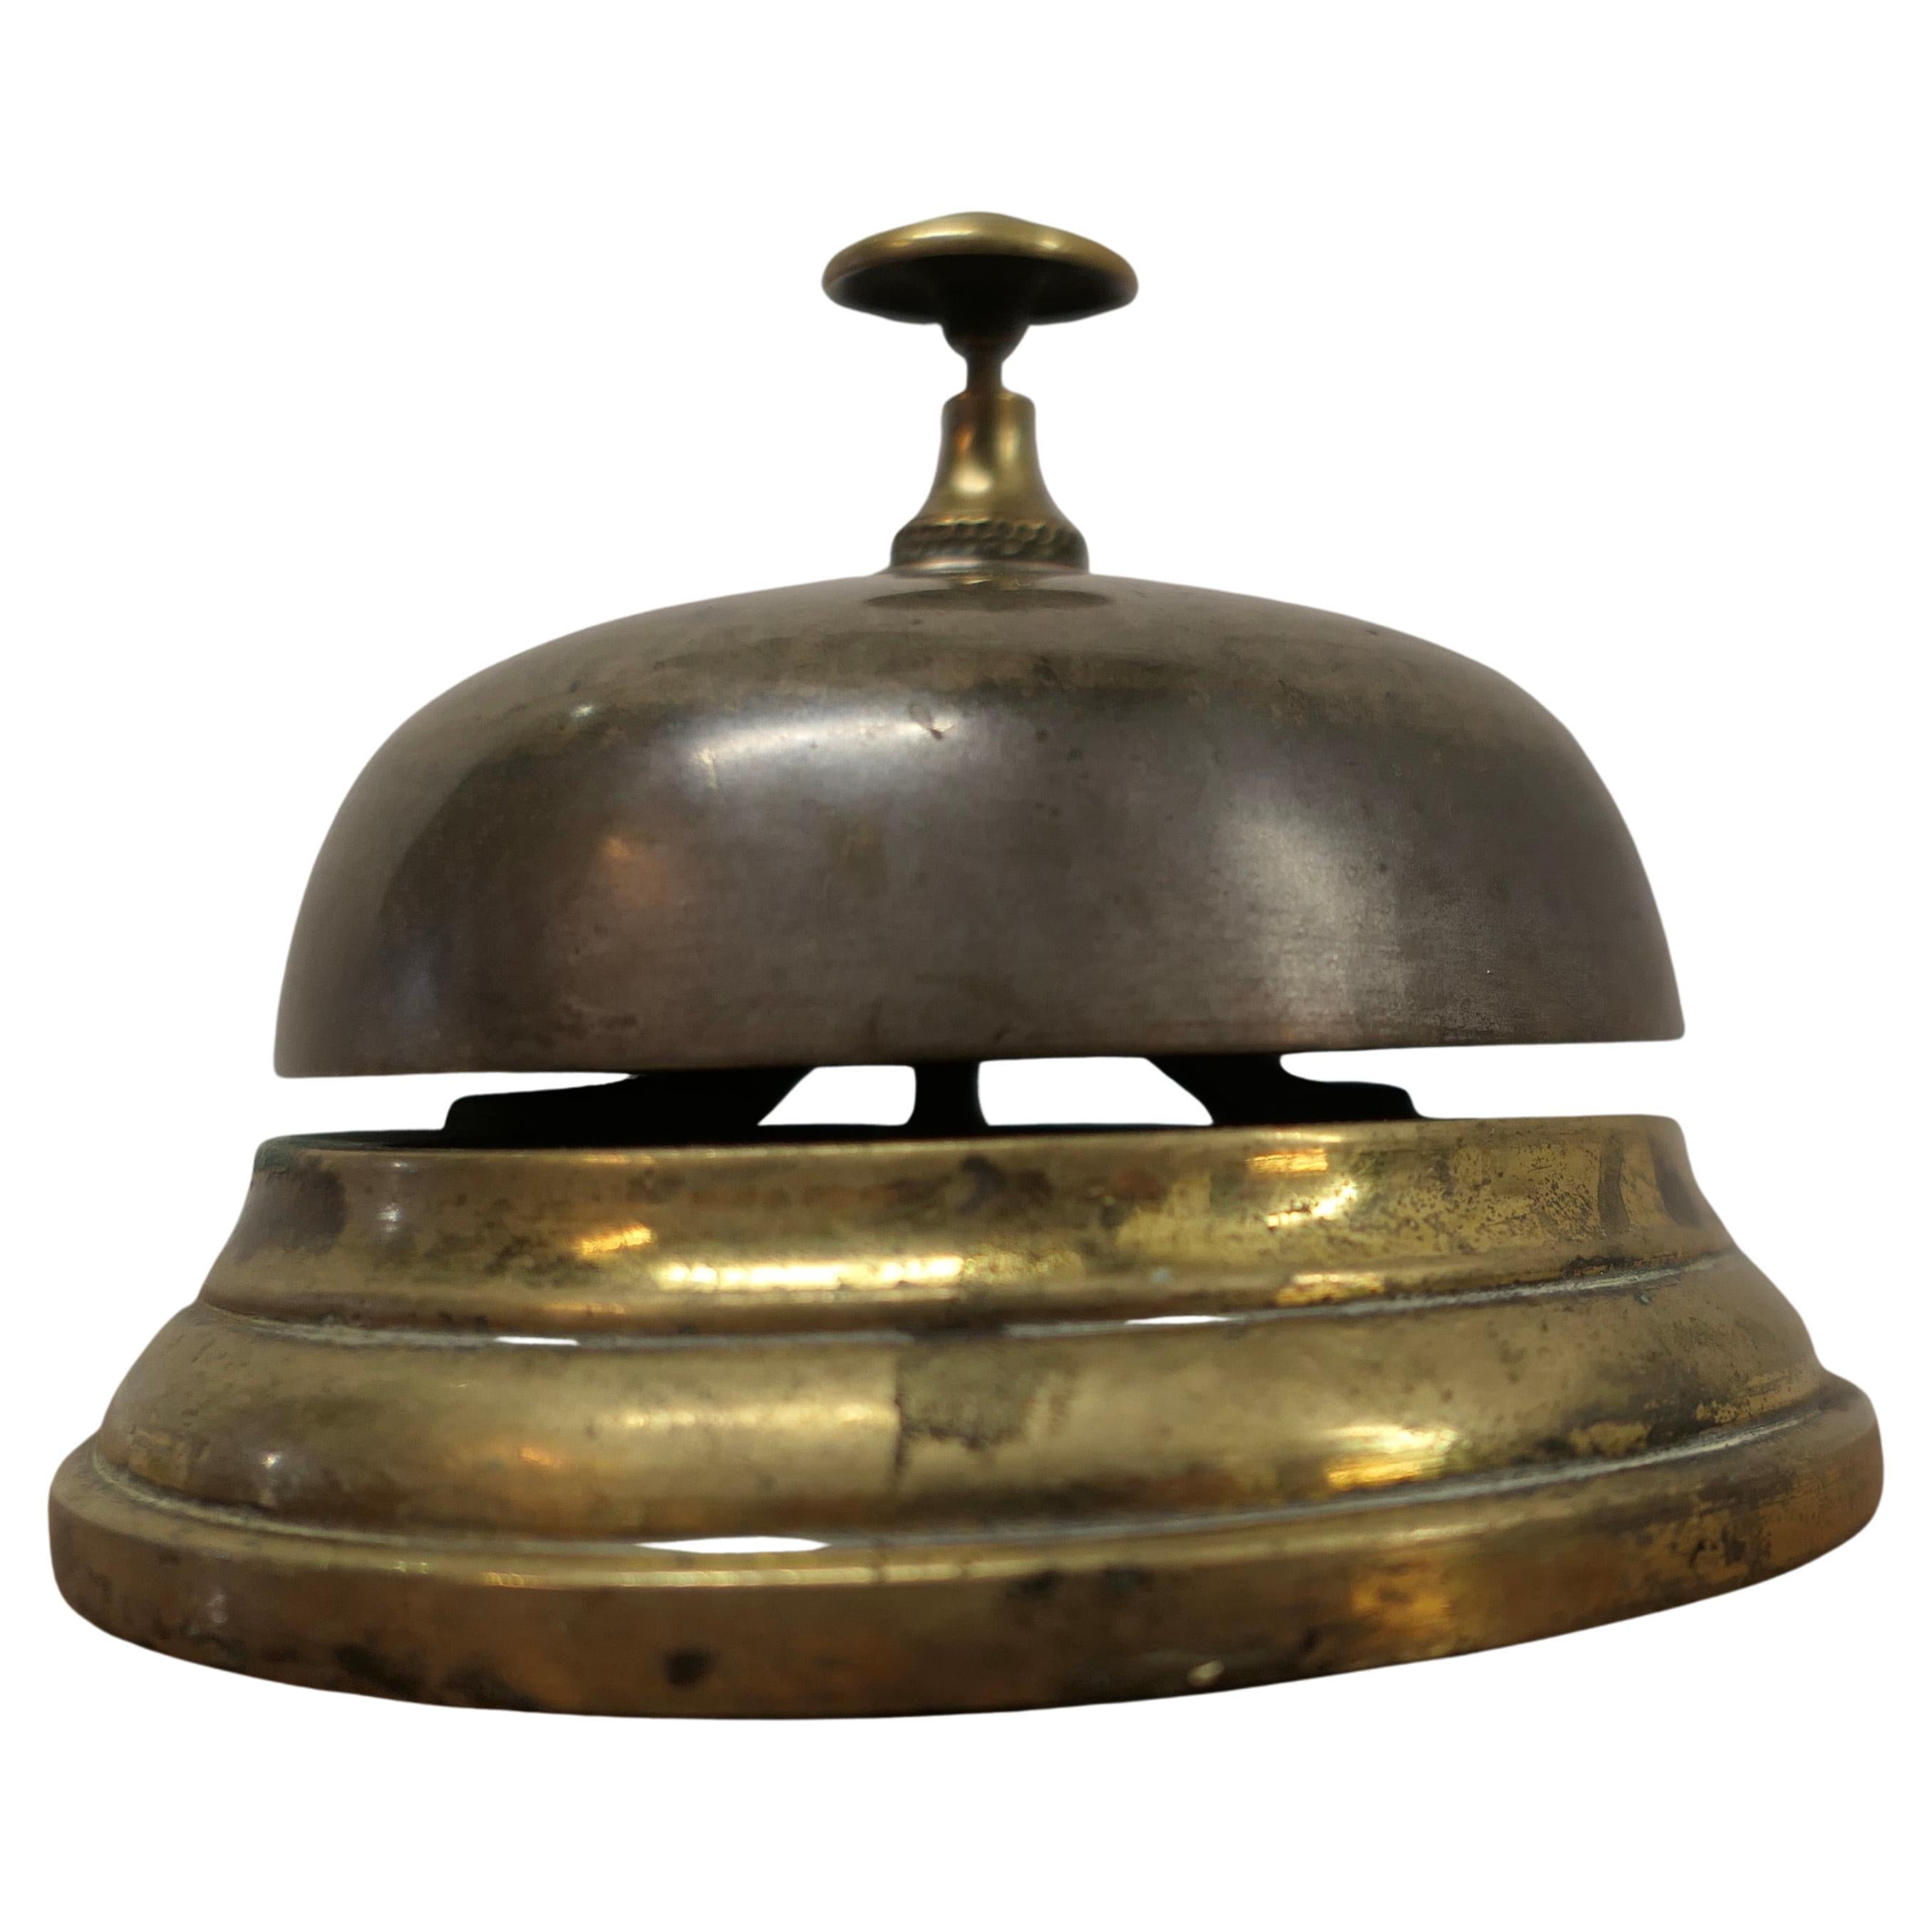  Brass Counter Top Courtesy Bell, Reception Desk Bell  Made in Solid Brass  For Sale